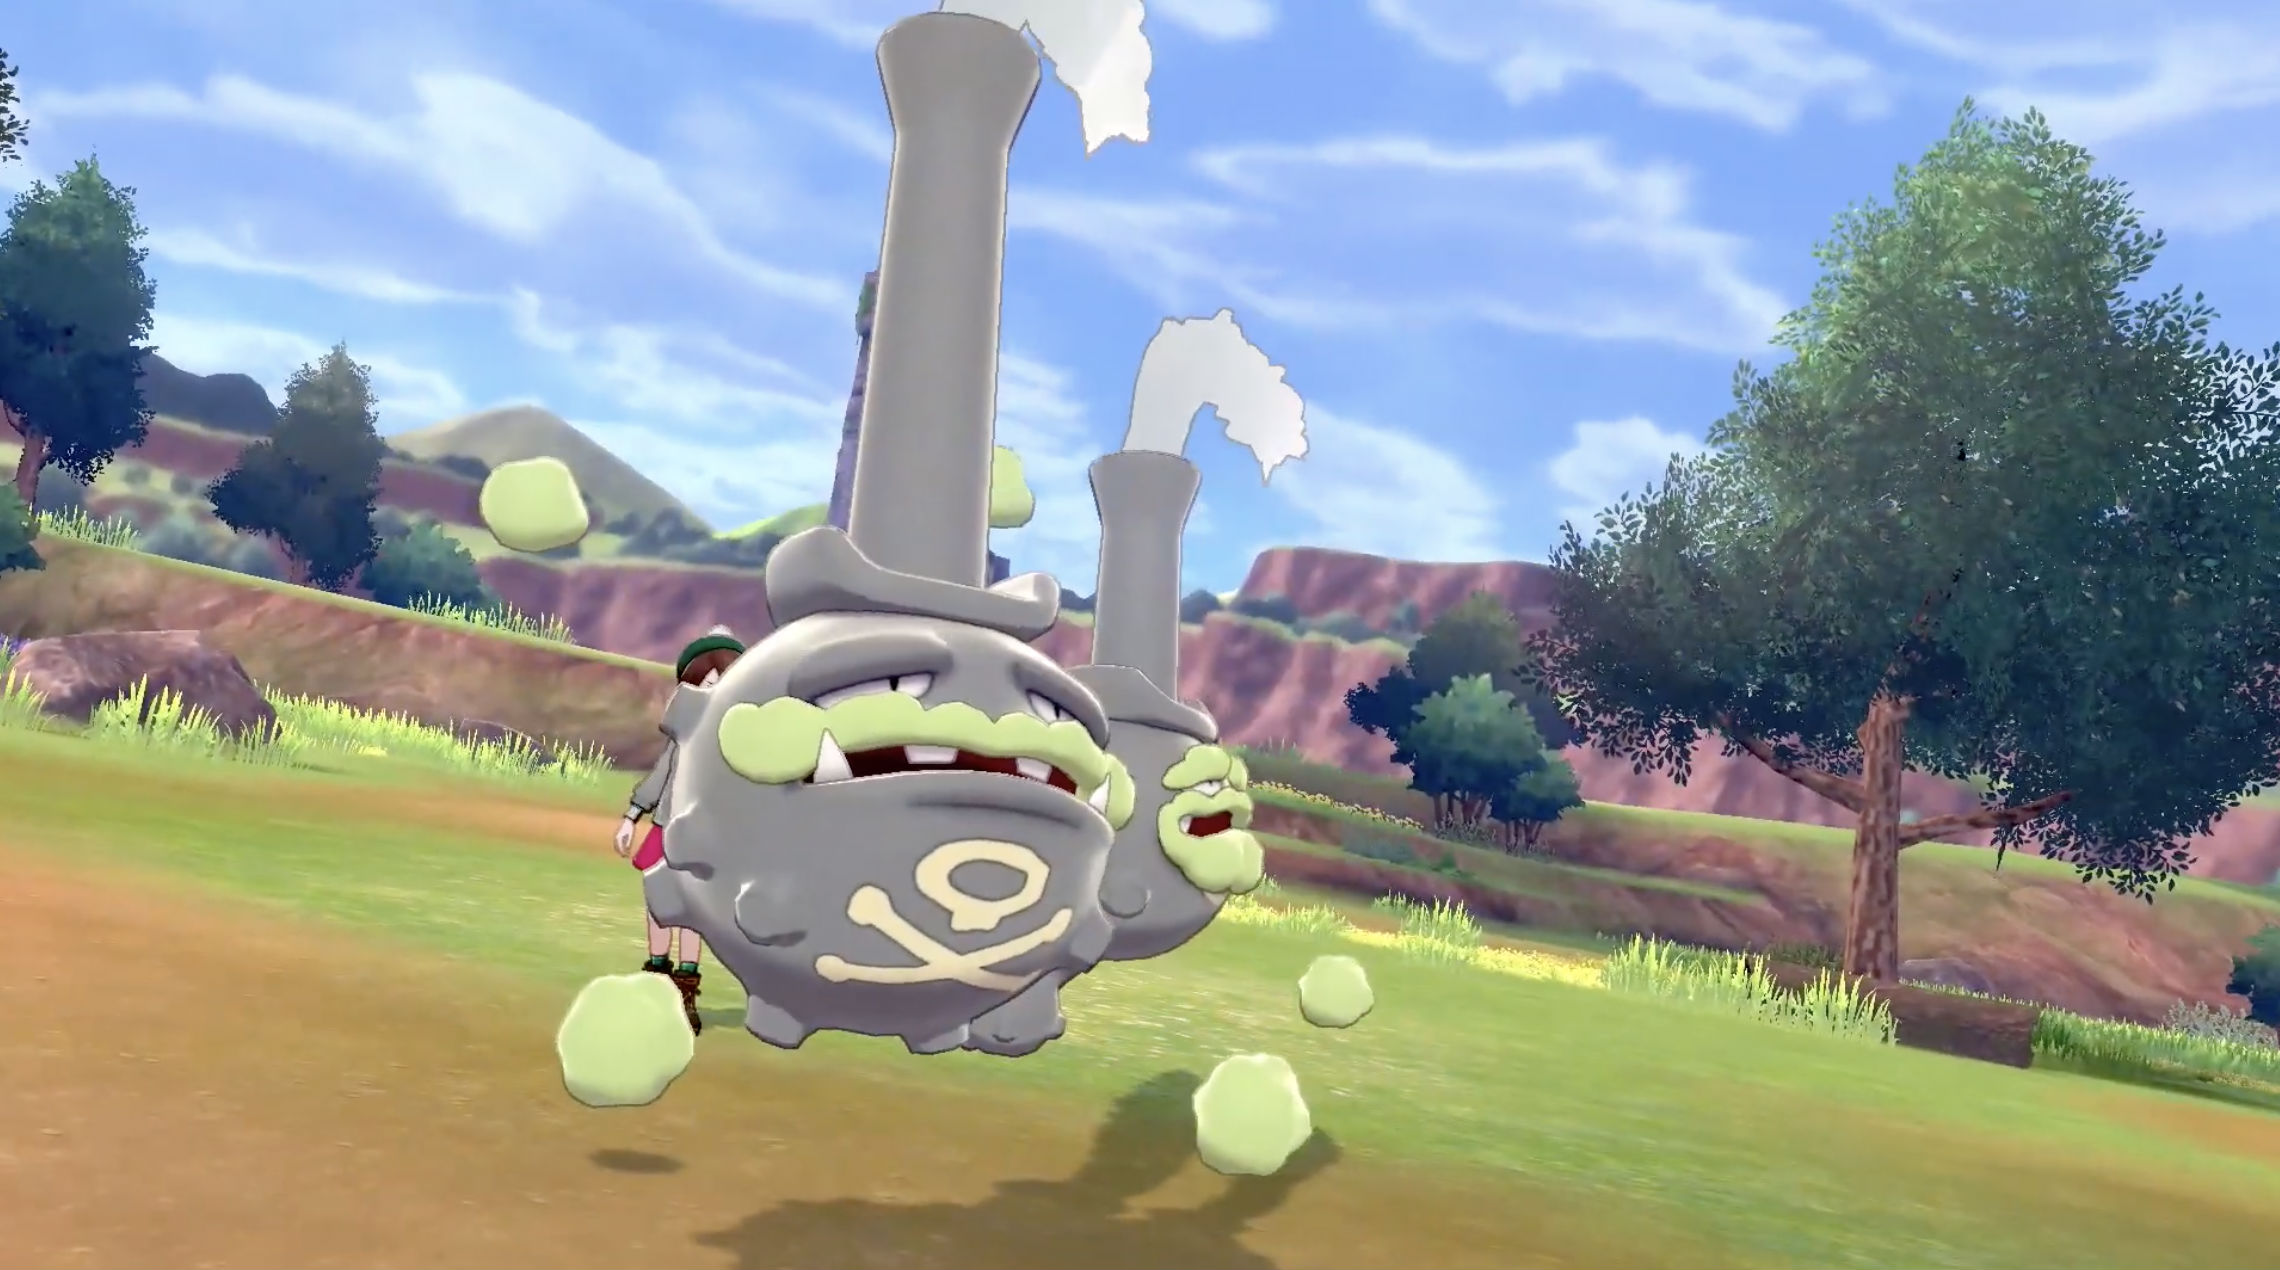 Pokémon Sword & Shield Trailer Shows Off New Rivals And New Forms Of Old Pokémon